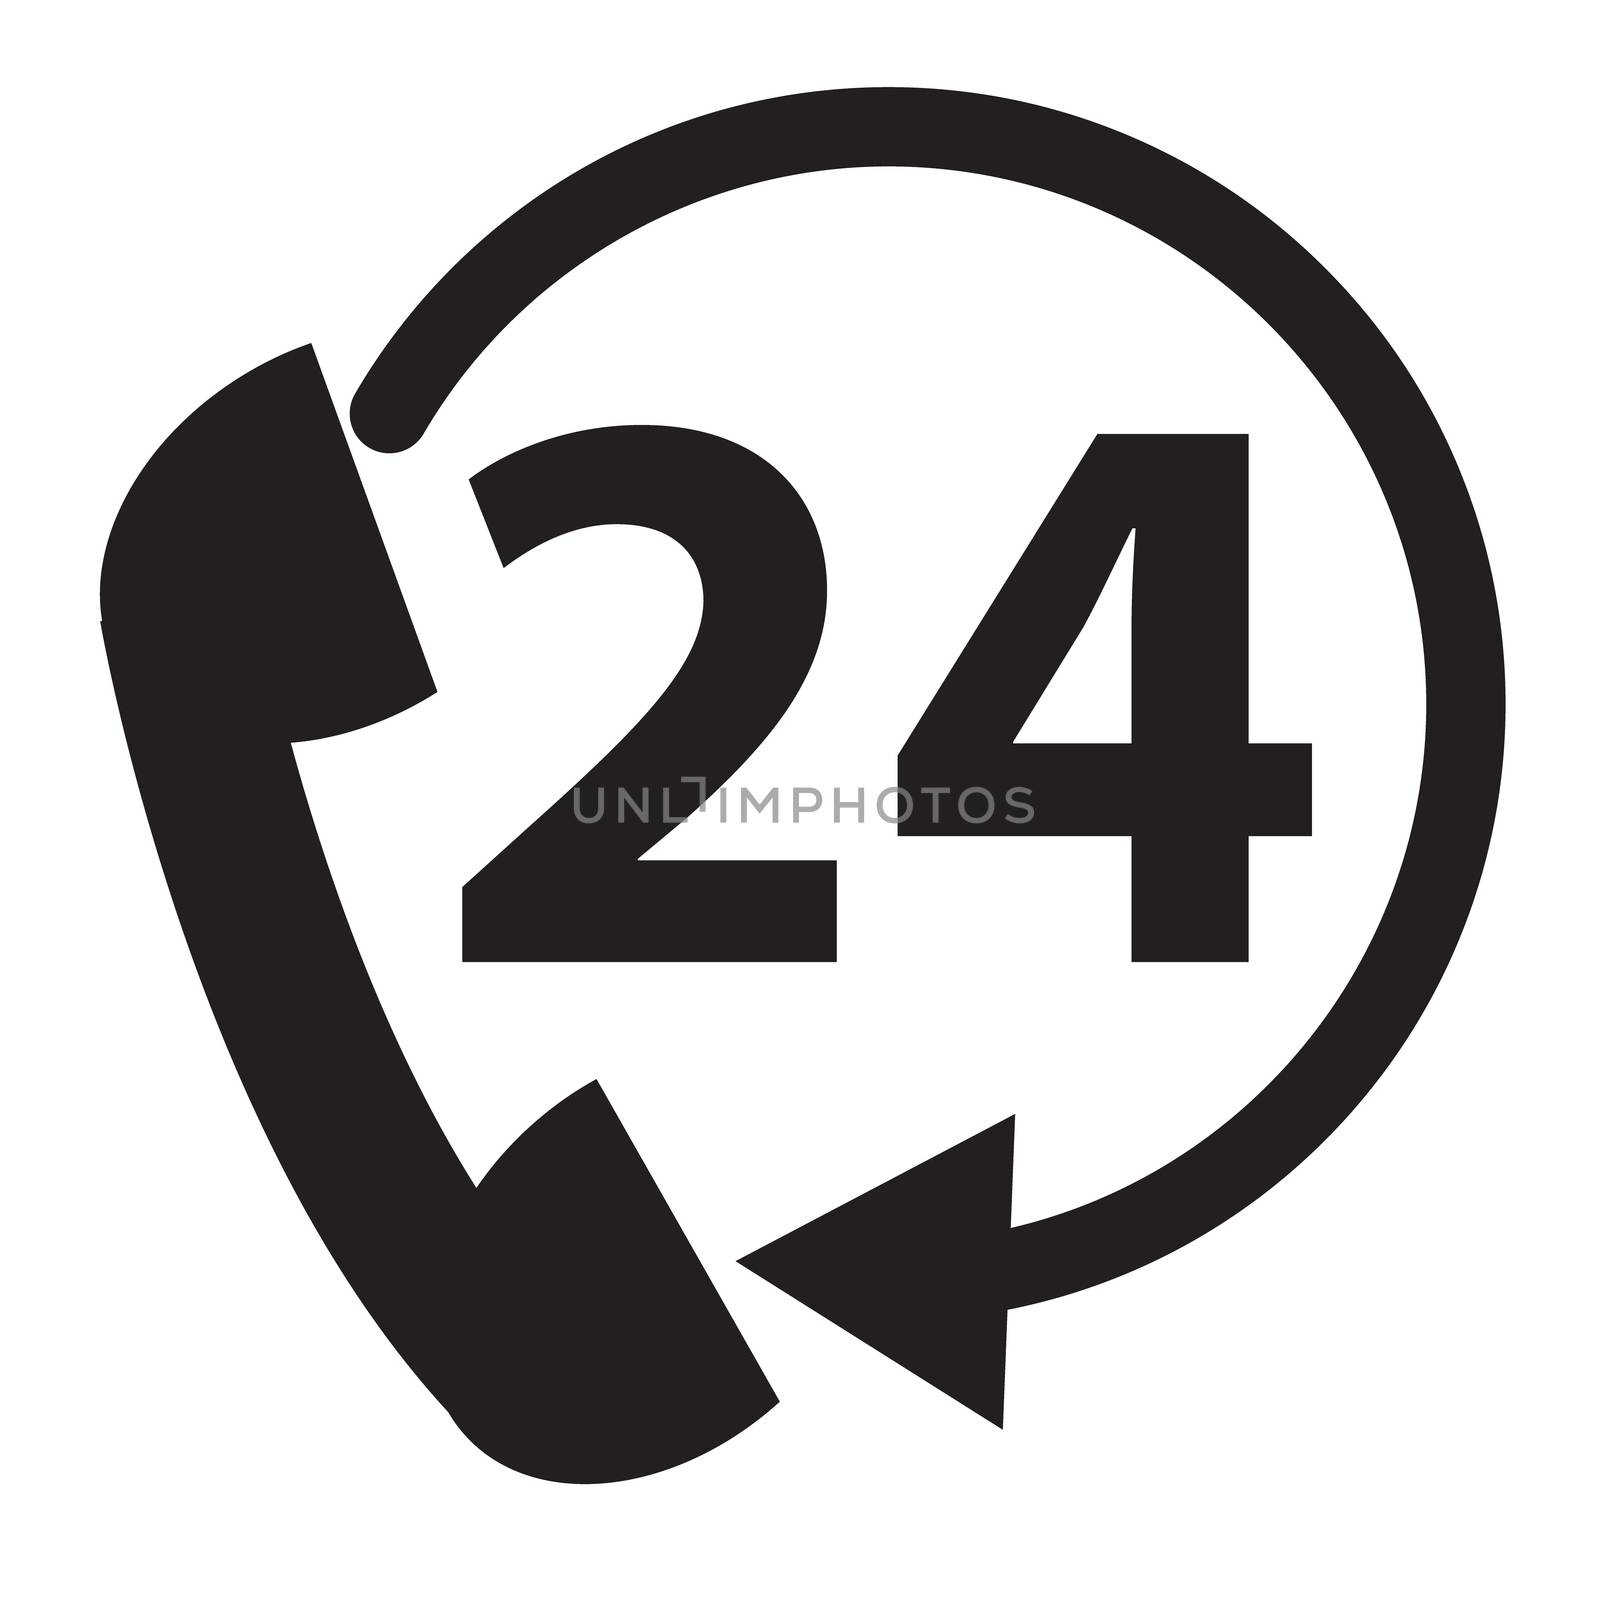 telephone support icon on white background. telephone support symbol. flat style. telephone support for your web site design, logo, app, UI.